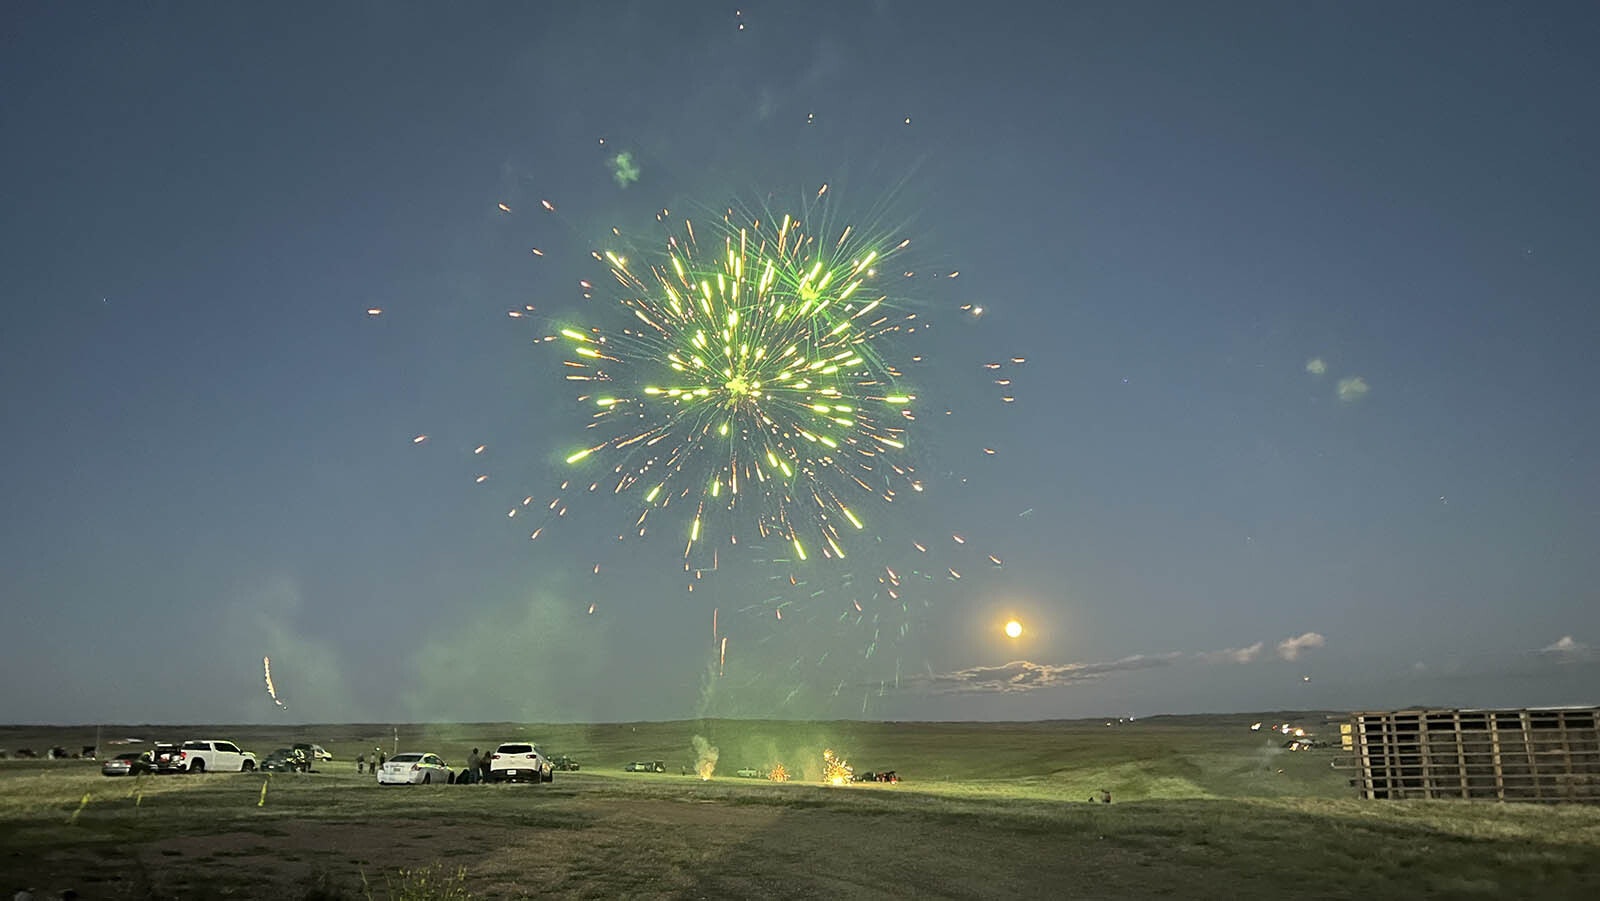 A colorful mortar shell bursts in sky during the fireworks "shoot-off" at the Wholesale Fireworks outlet south of Laramie on Sunday.